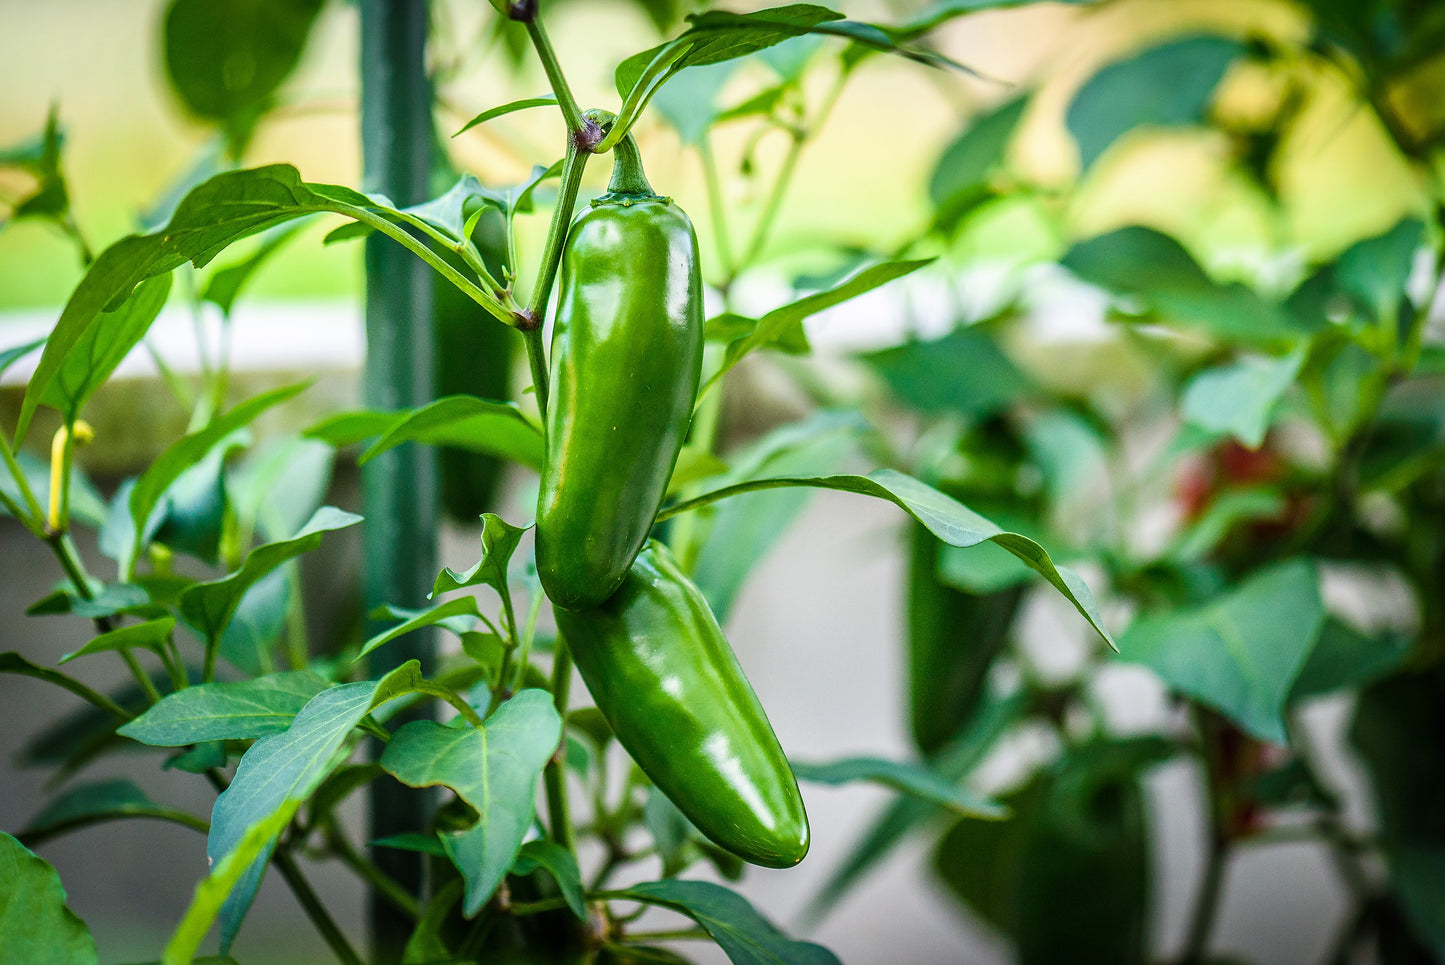 400 EARLY JALAPENO PEPPER Green Medium Hot Capsicum Annuum Mexican Chili Vegetable Seeds